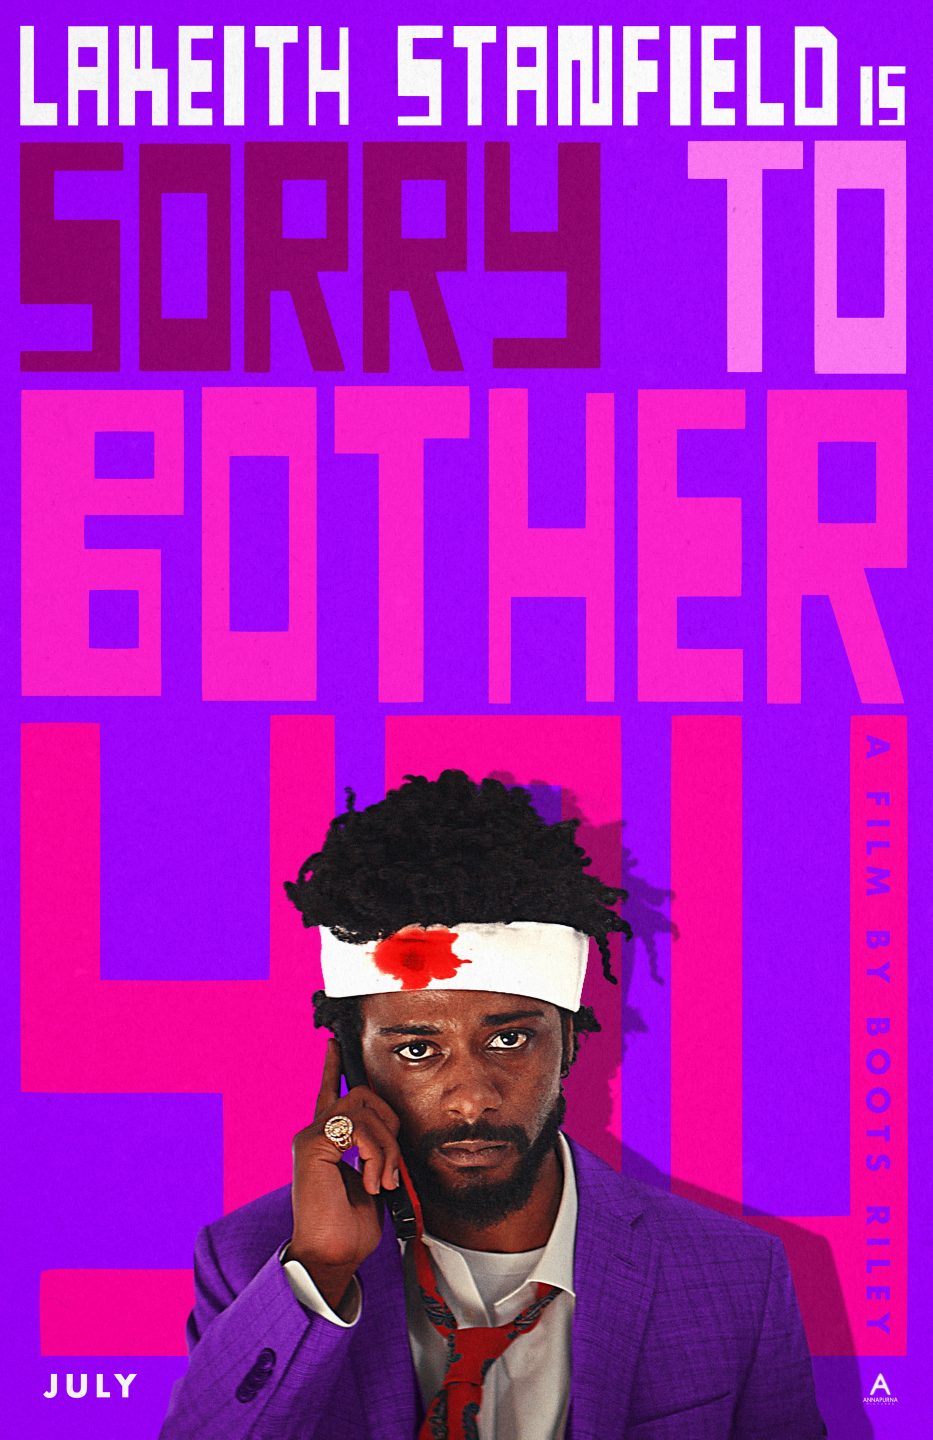 Sorry To Bother You character poster (Annapurna Pictures)